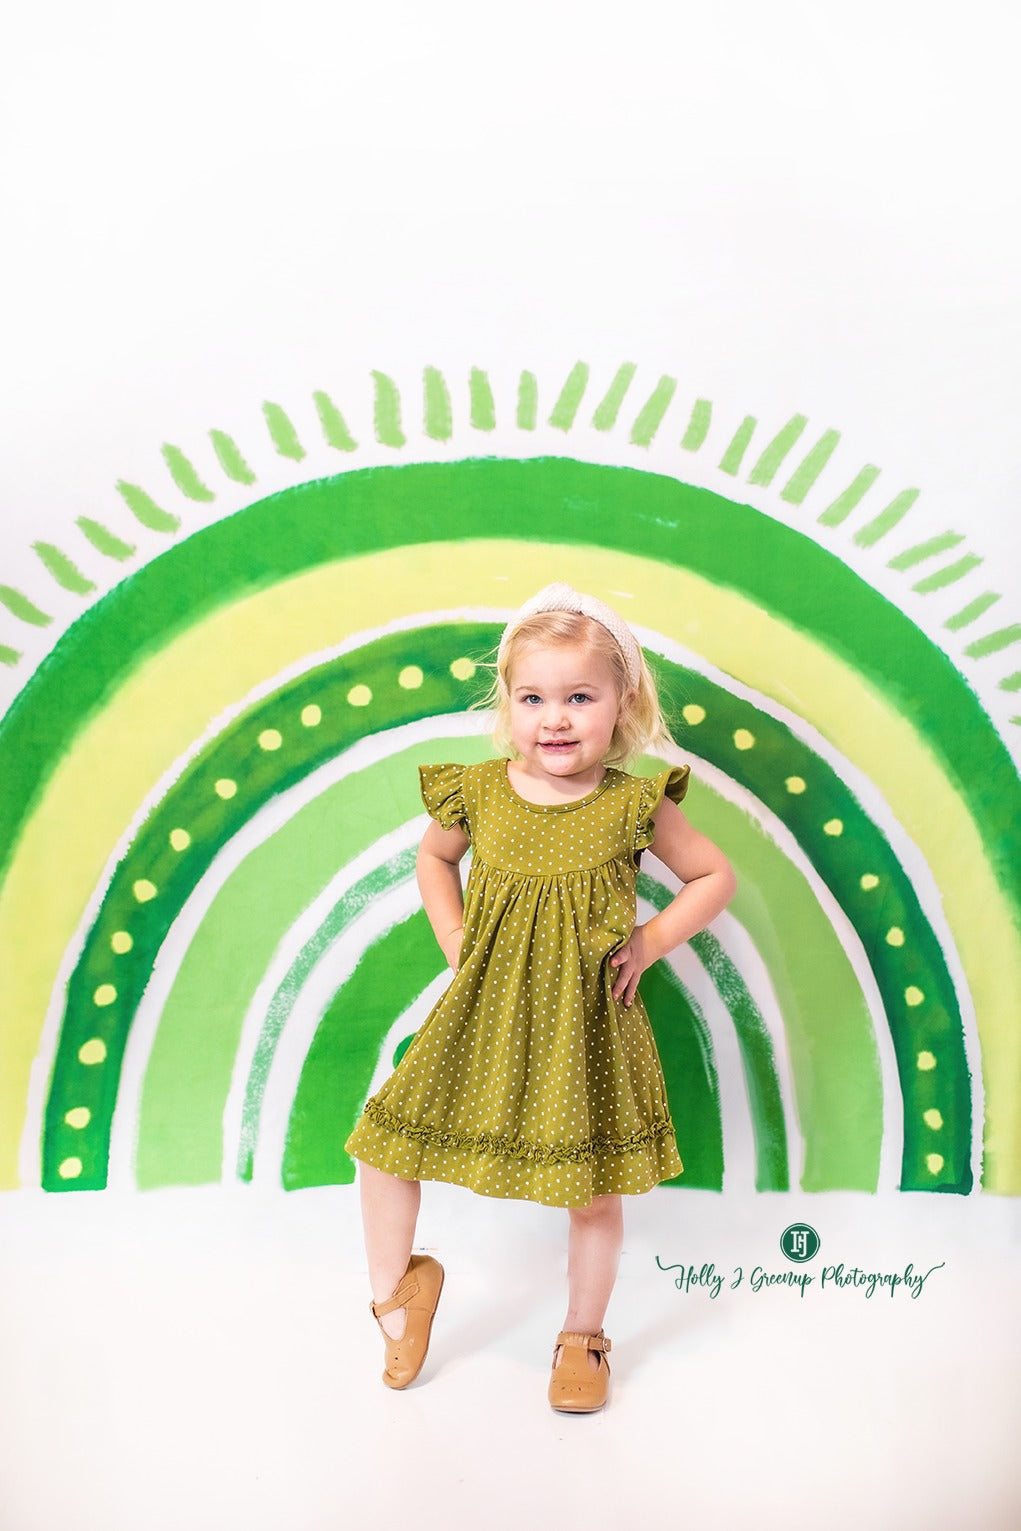 Kate St.Patrick's Day Backdrop Rainbow Green Lucky Clover Designed by GQ